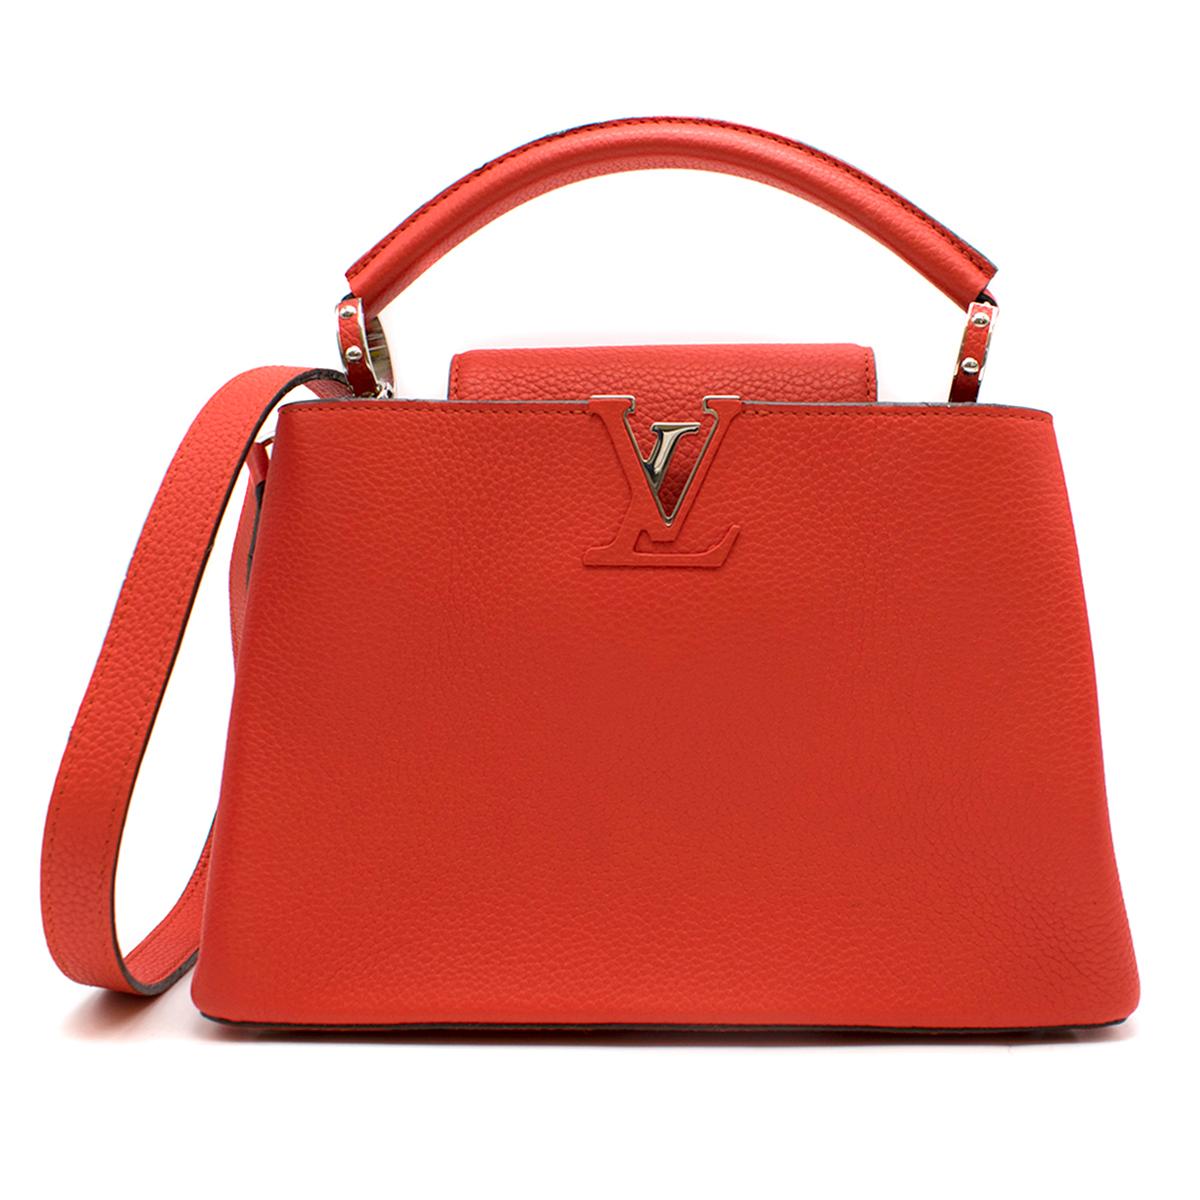 Louis Vuitton Red Capucines BB Shoulder Bag ( new with tag)

- Red Shoulder/ Top handle Bag 
- Grained calfskin leather 
- LV logo detail at front top with silver toned leather 
- Top handle, rolled leather and studded ringlet 
- Flap front,